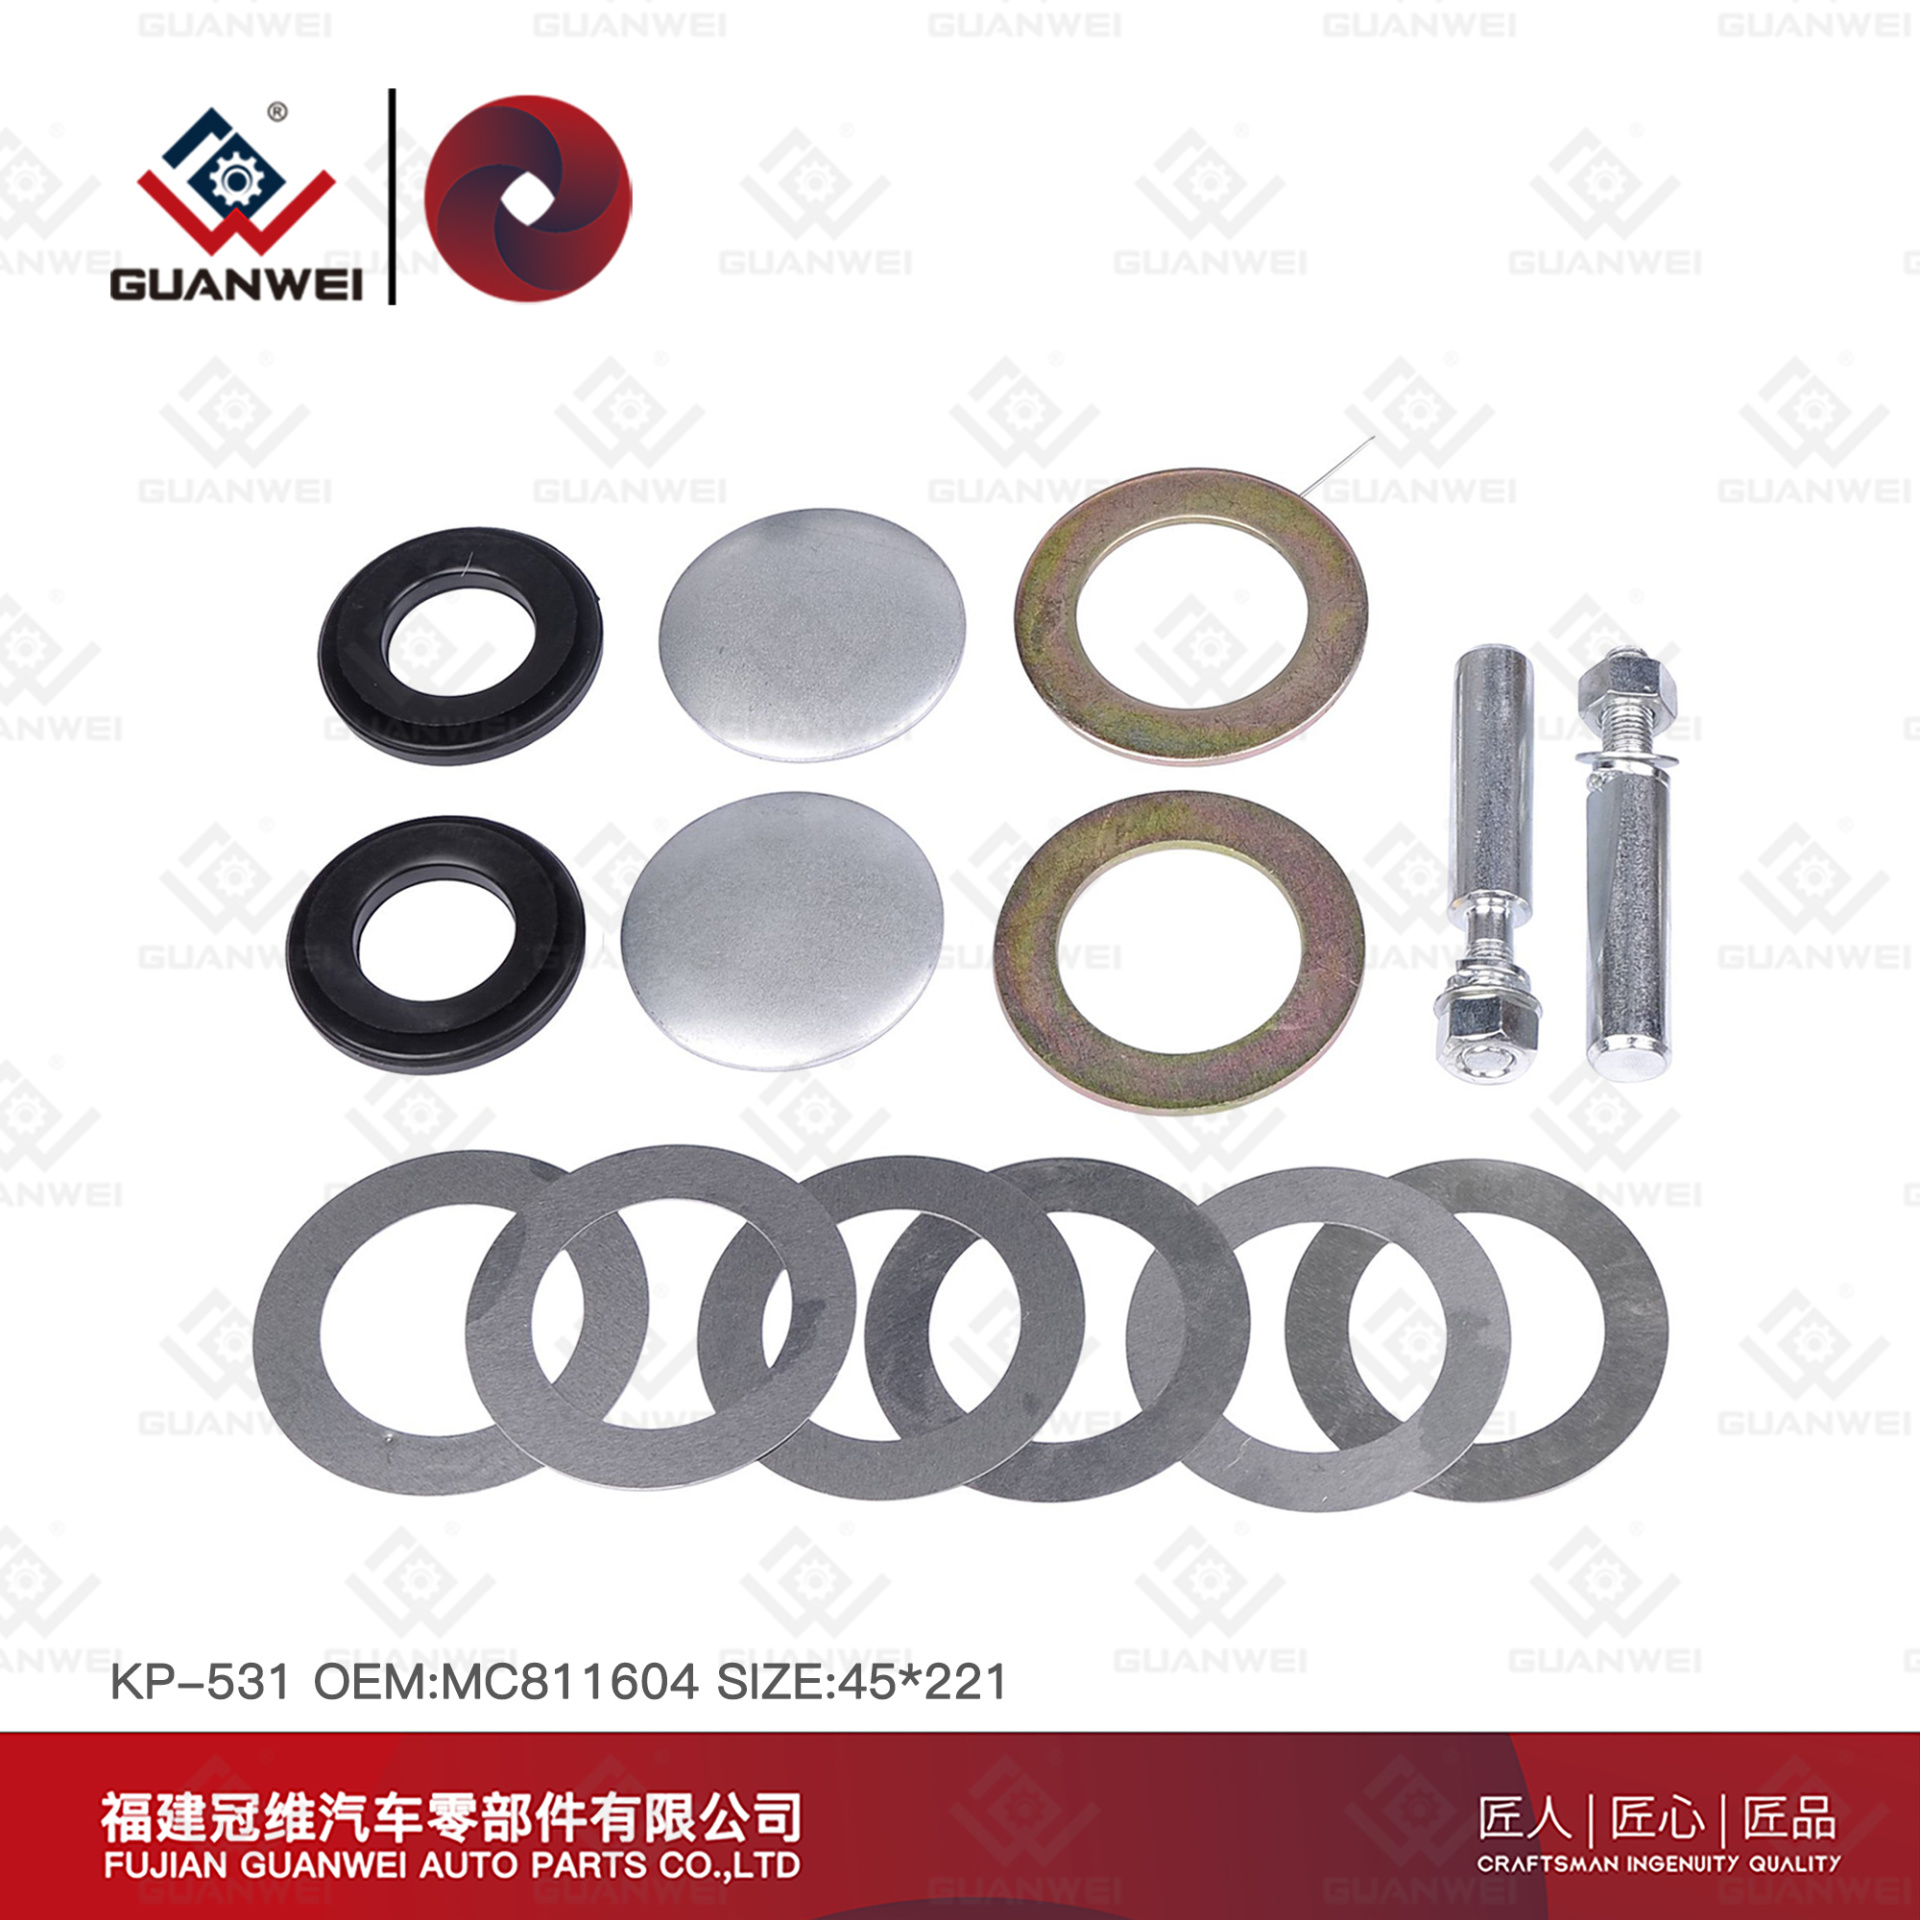 Knuckle King Pin Kit KP-531 OEM number:MC811604 SIZE:45x205 for Mitsubishi